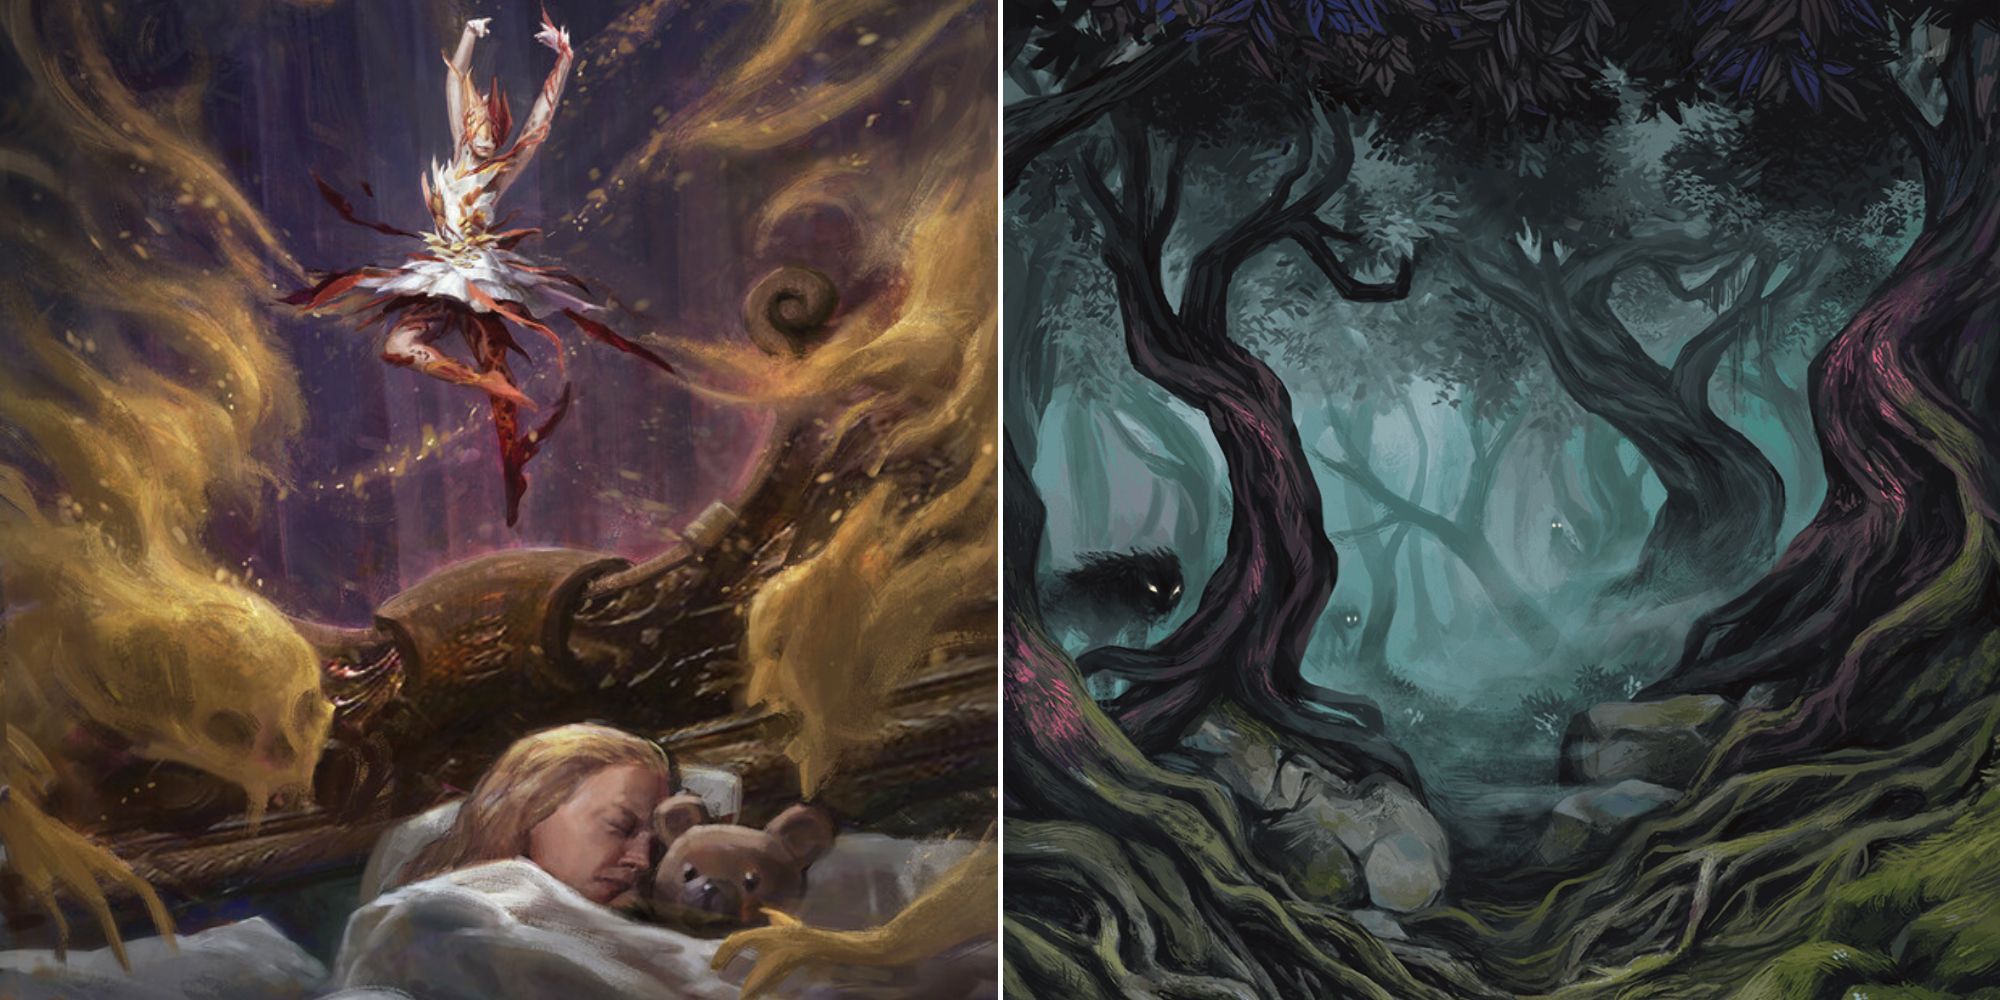 D&D Artwork of A child being haunted by demons and a creepy forest full of monsters lurking in the mist